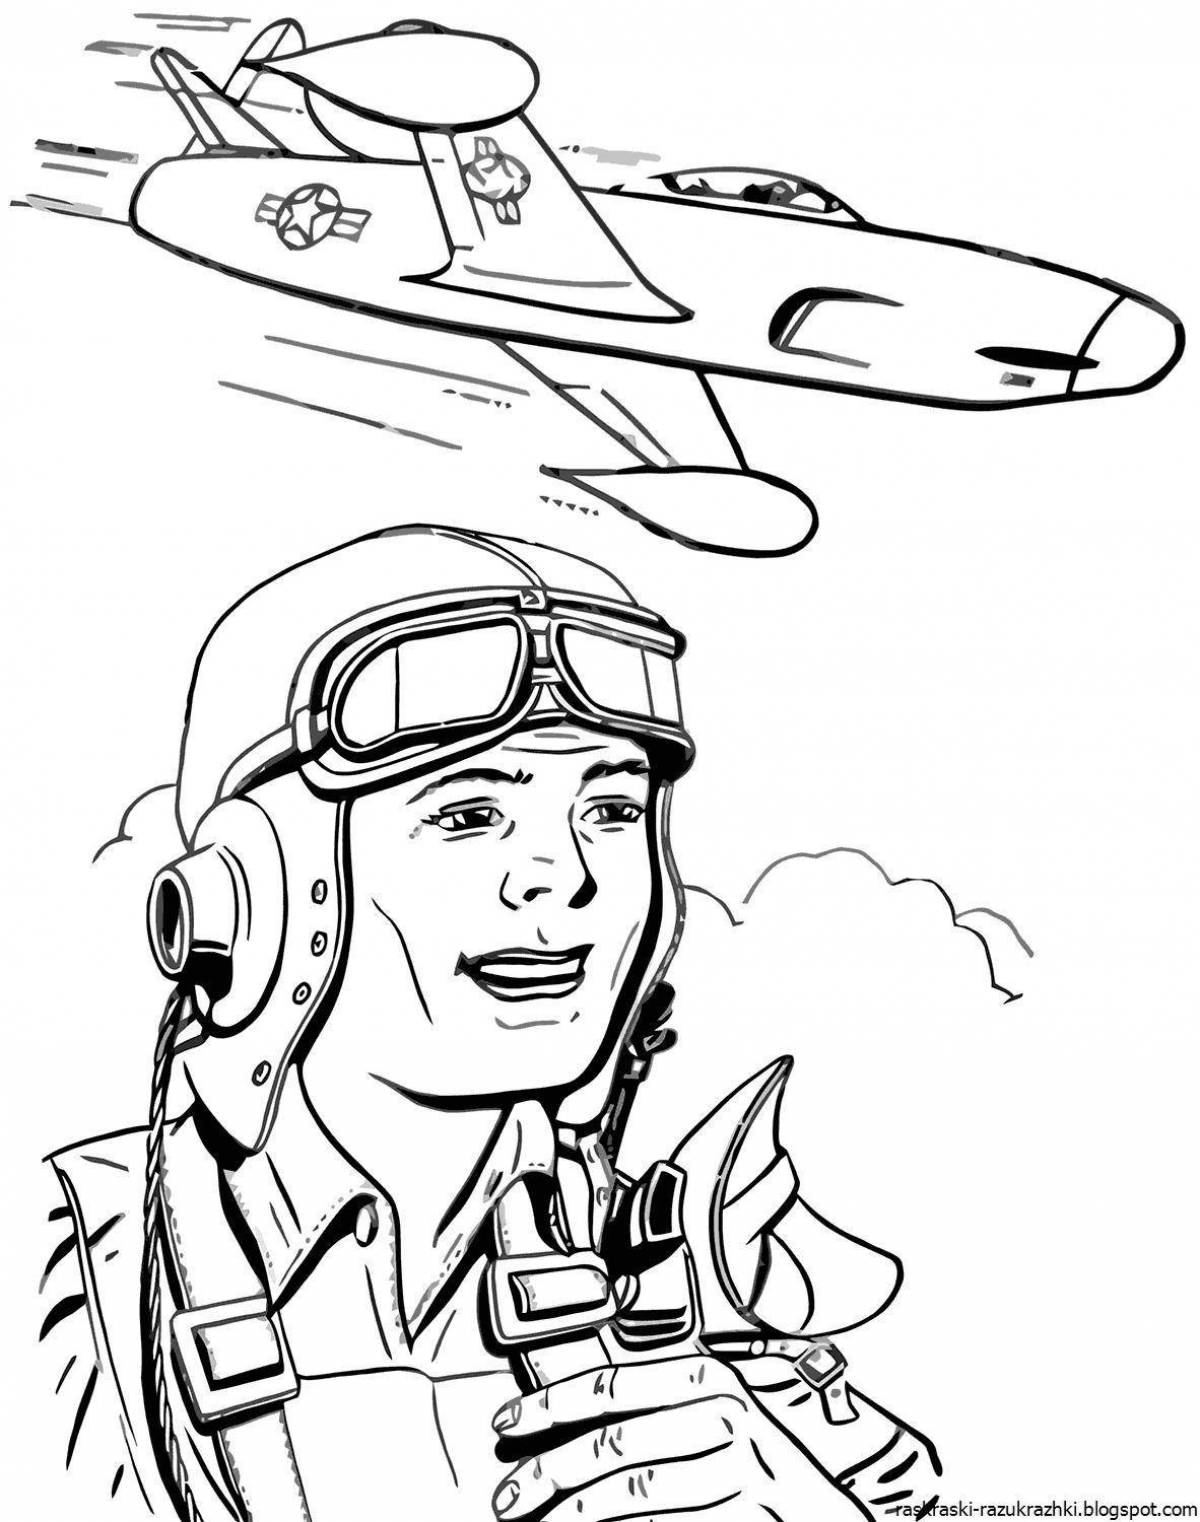 Impressive military profession coloring book for kids